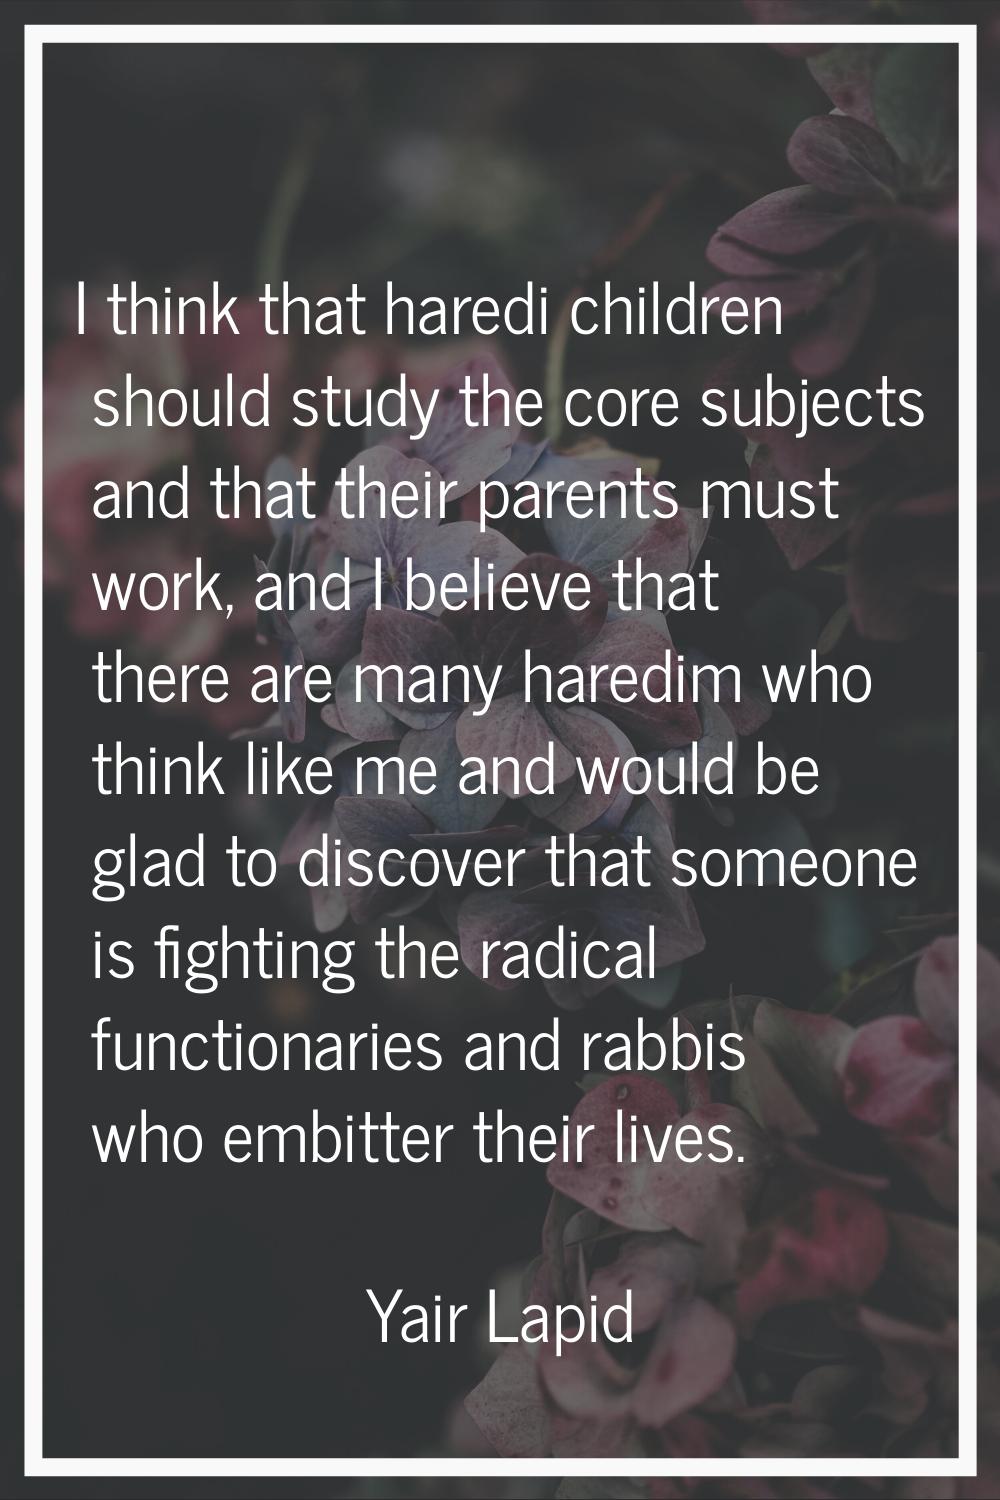 I think that haredi children should study the core subjects and that their parents must work, and I